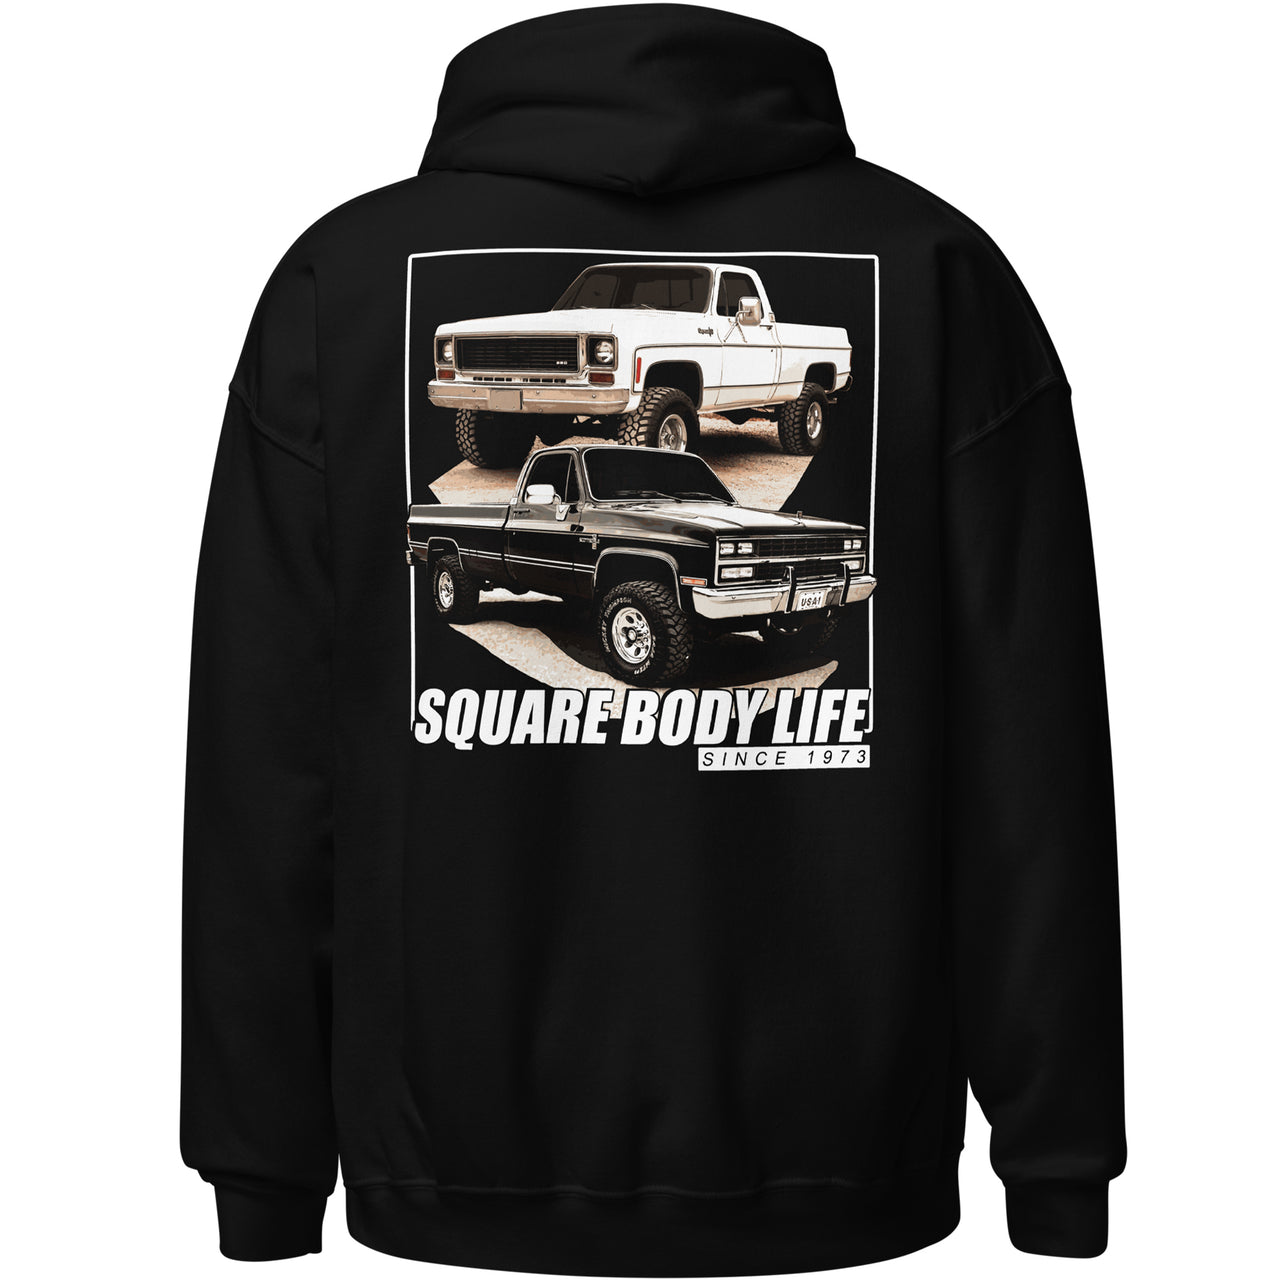 Square Body Life Hoodie in black - back view